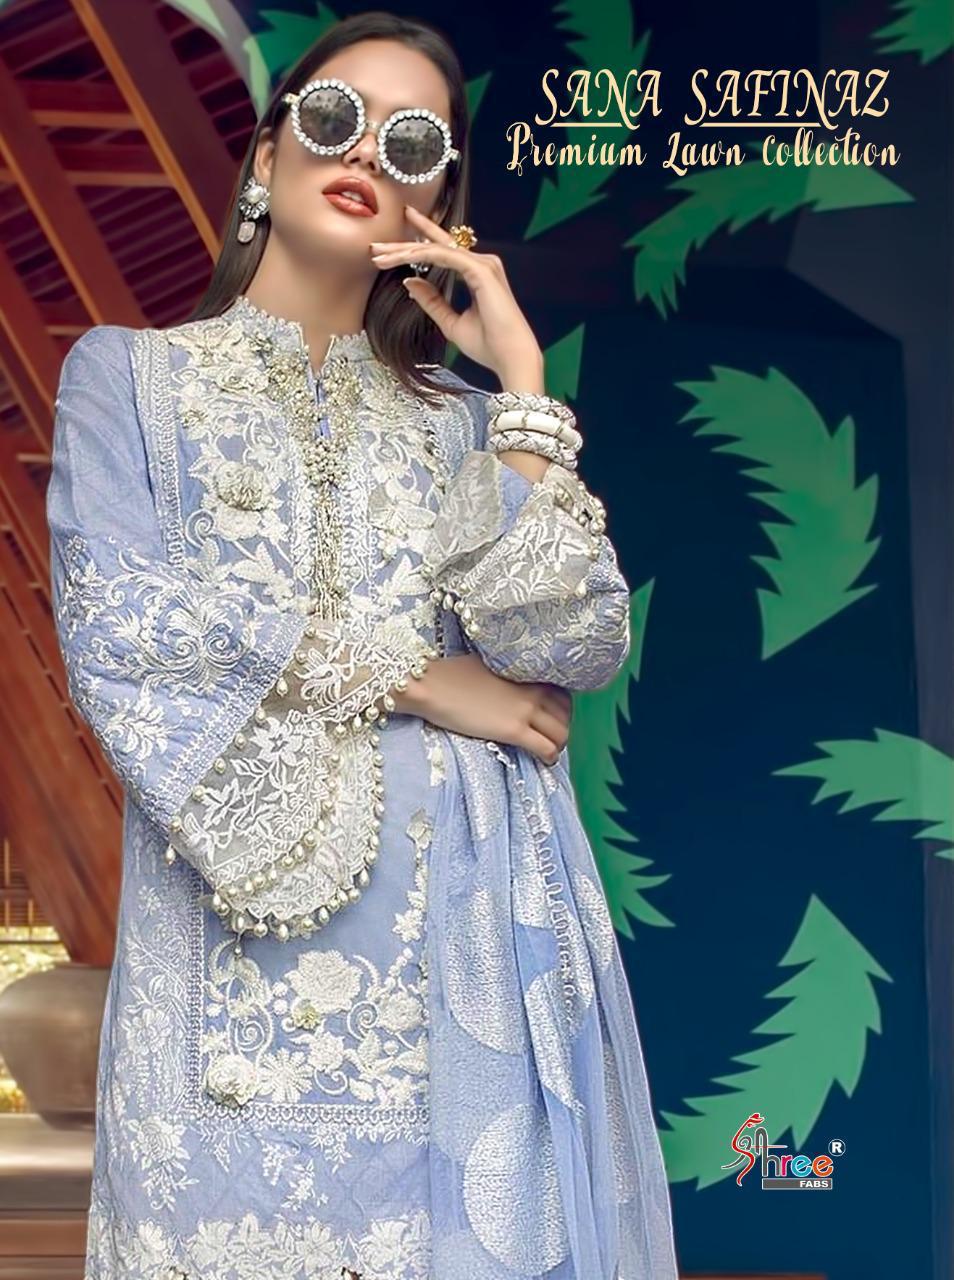 Shree Fab Sana Safinaz Premium Lawn Collection Designer Pure Cotton With Embroidery Work Suits Wholesale